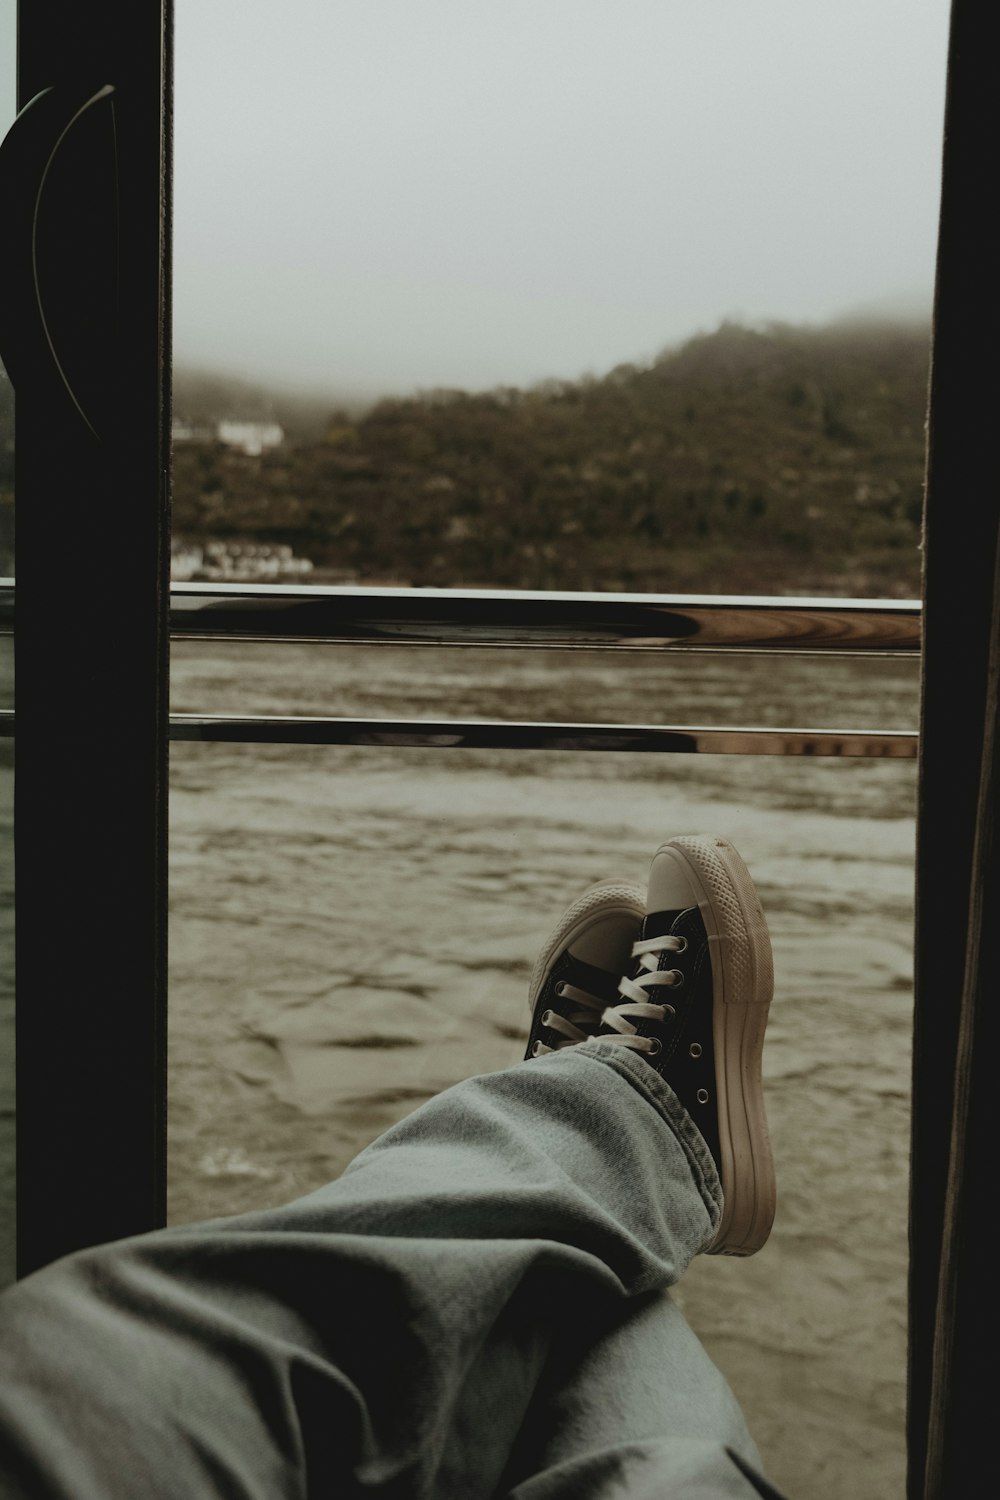 a person's feet in a pair of sneakers looking out a window